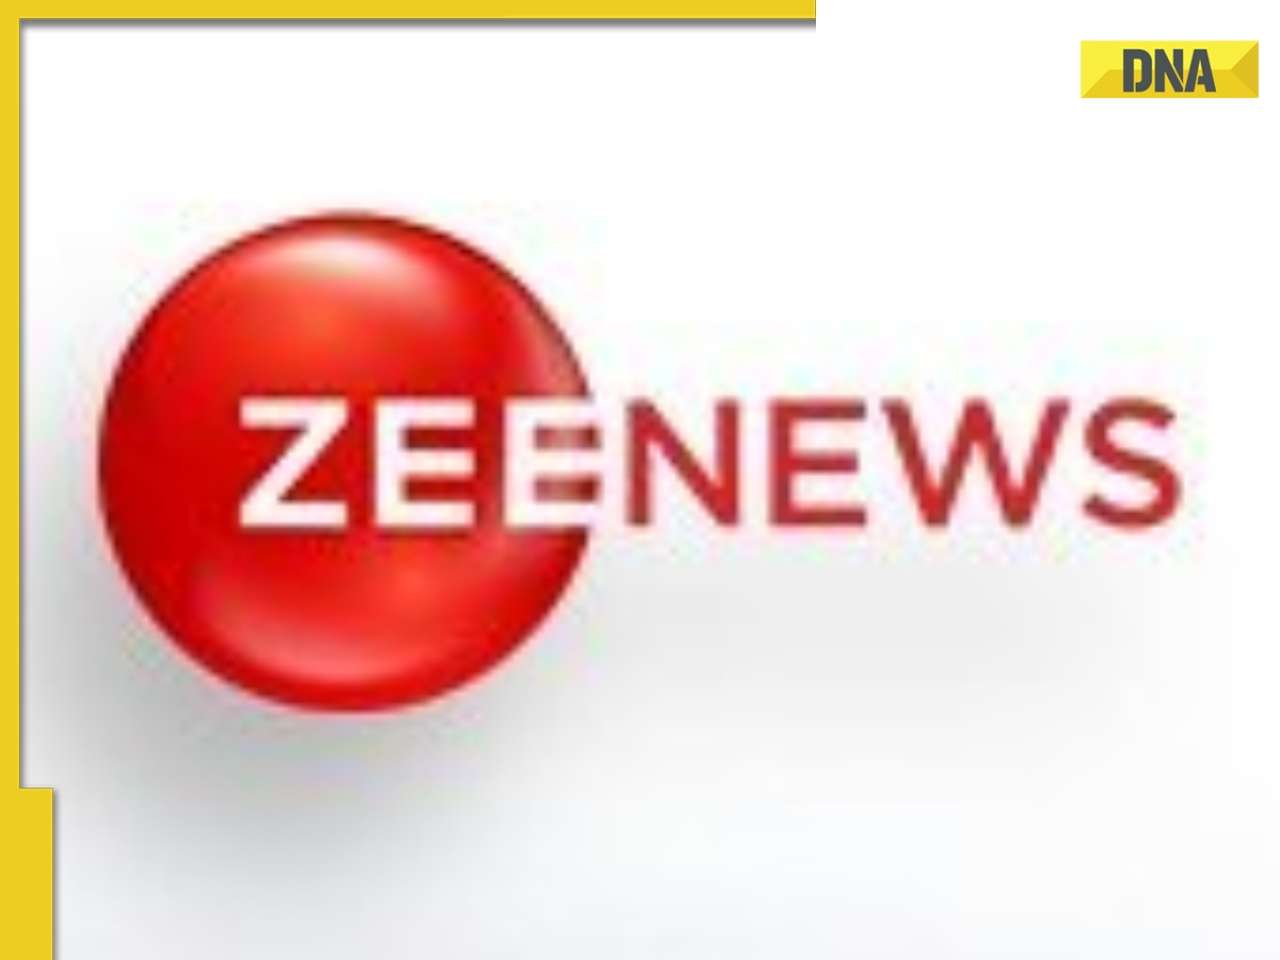 Zee News channel faces blackout in Punjab, other Zee channels available